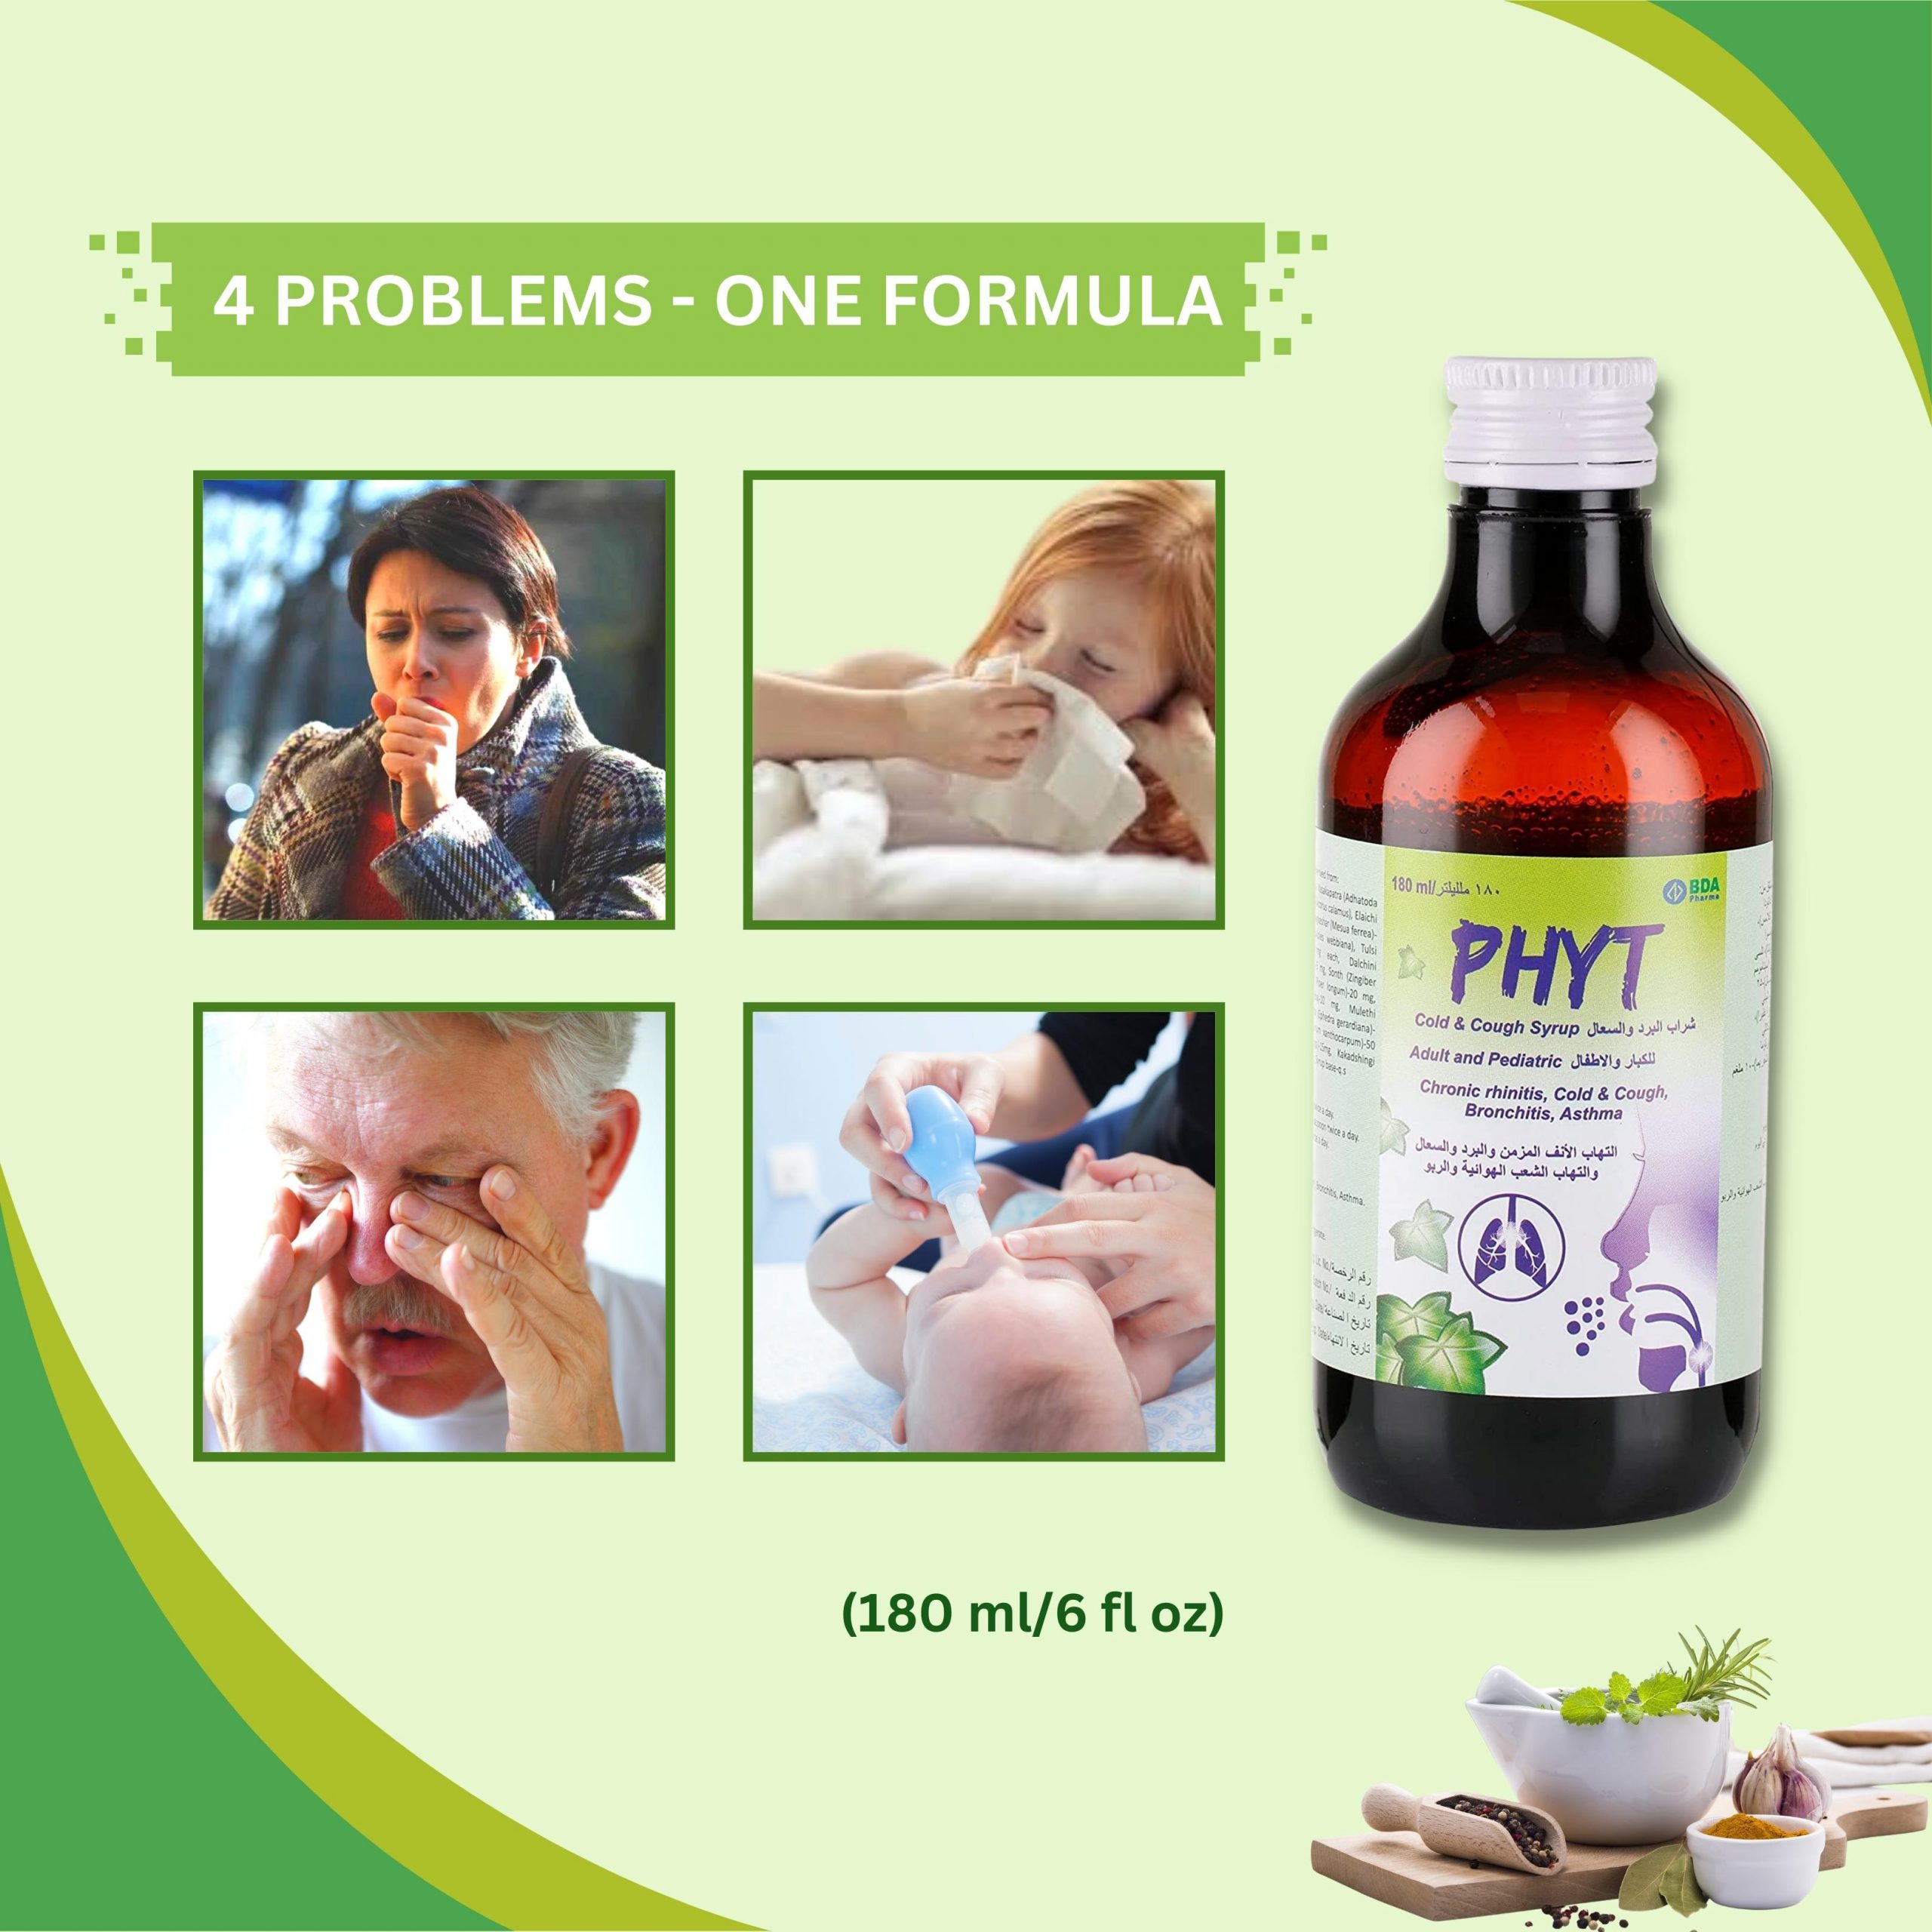 PHYT Cold & Cough Herbal Syrup